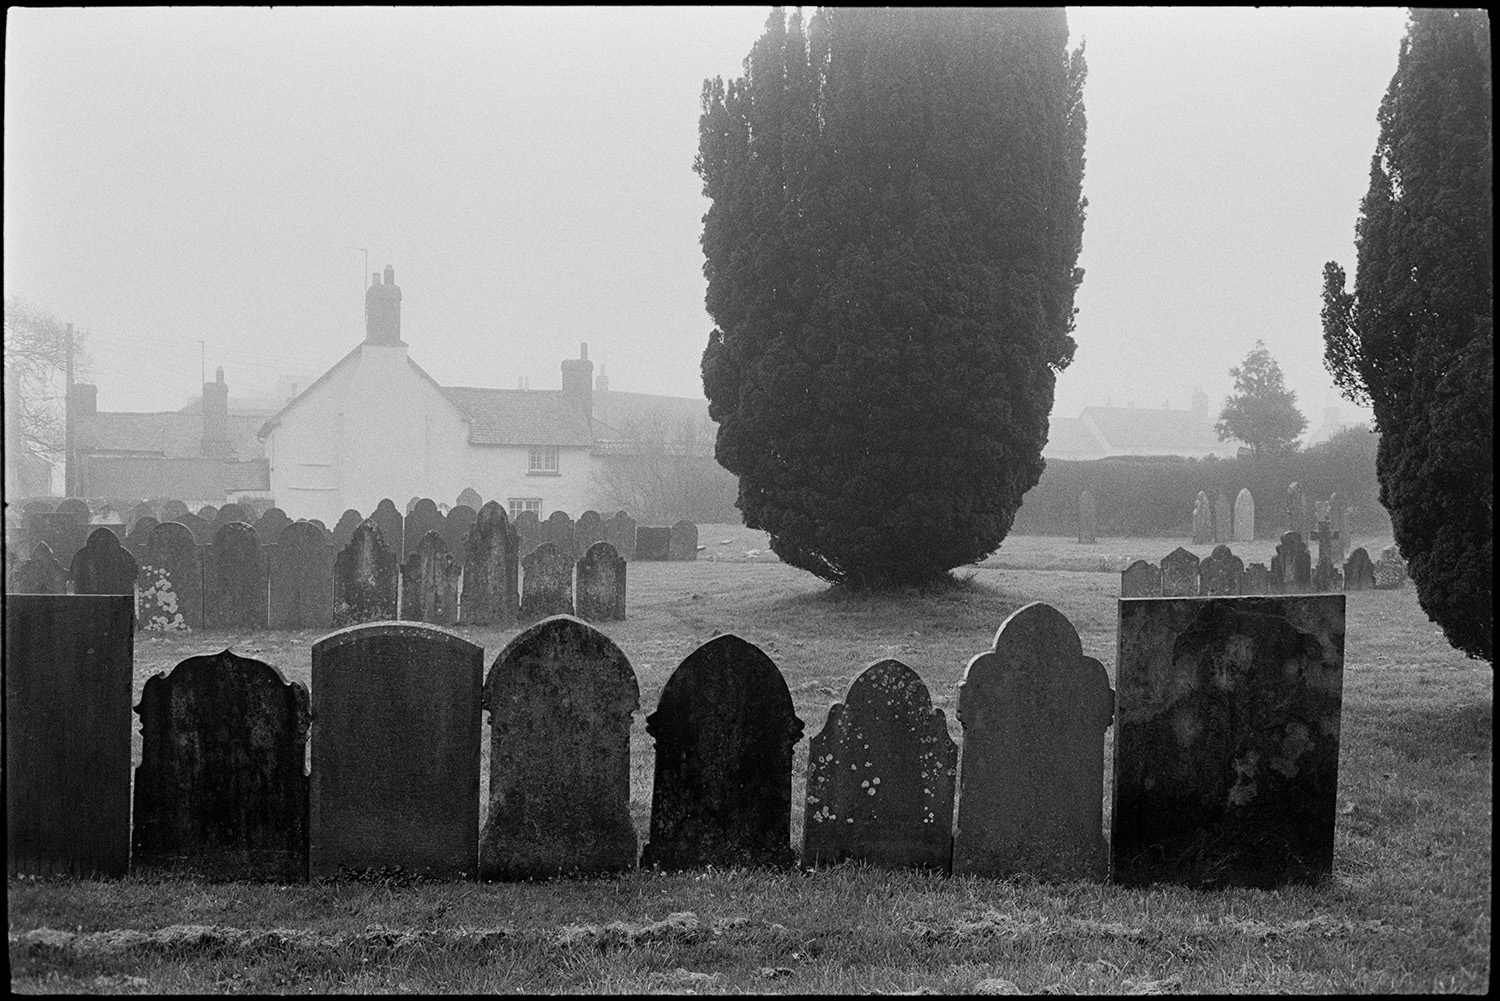 Church and graveyard, misty morning, tower with clock. Gravestones in row. 
[Rows of gravestones by yew trees in Burrington Churchyard on a misty morning.]